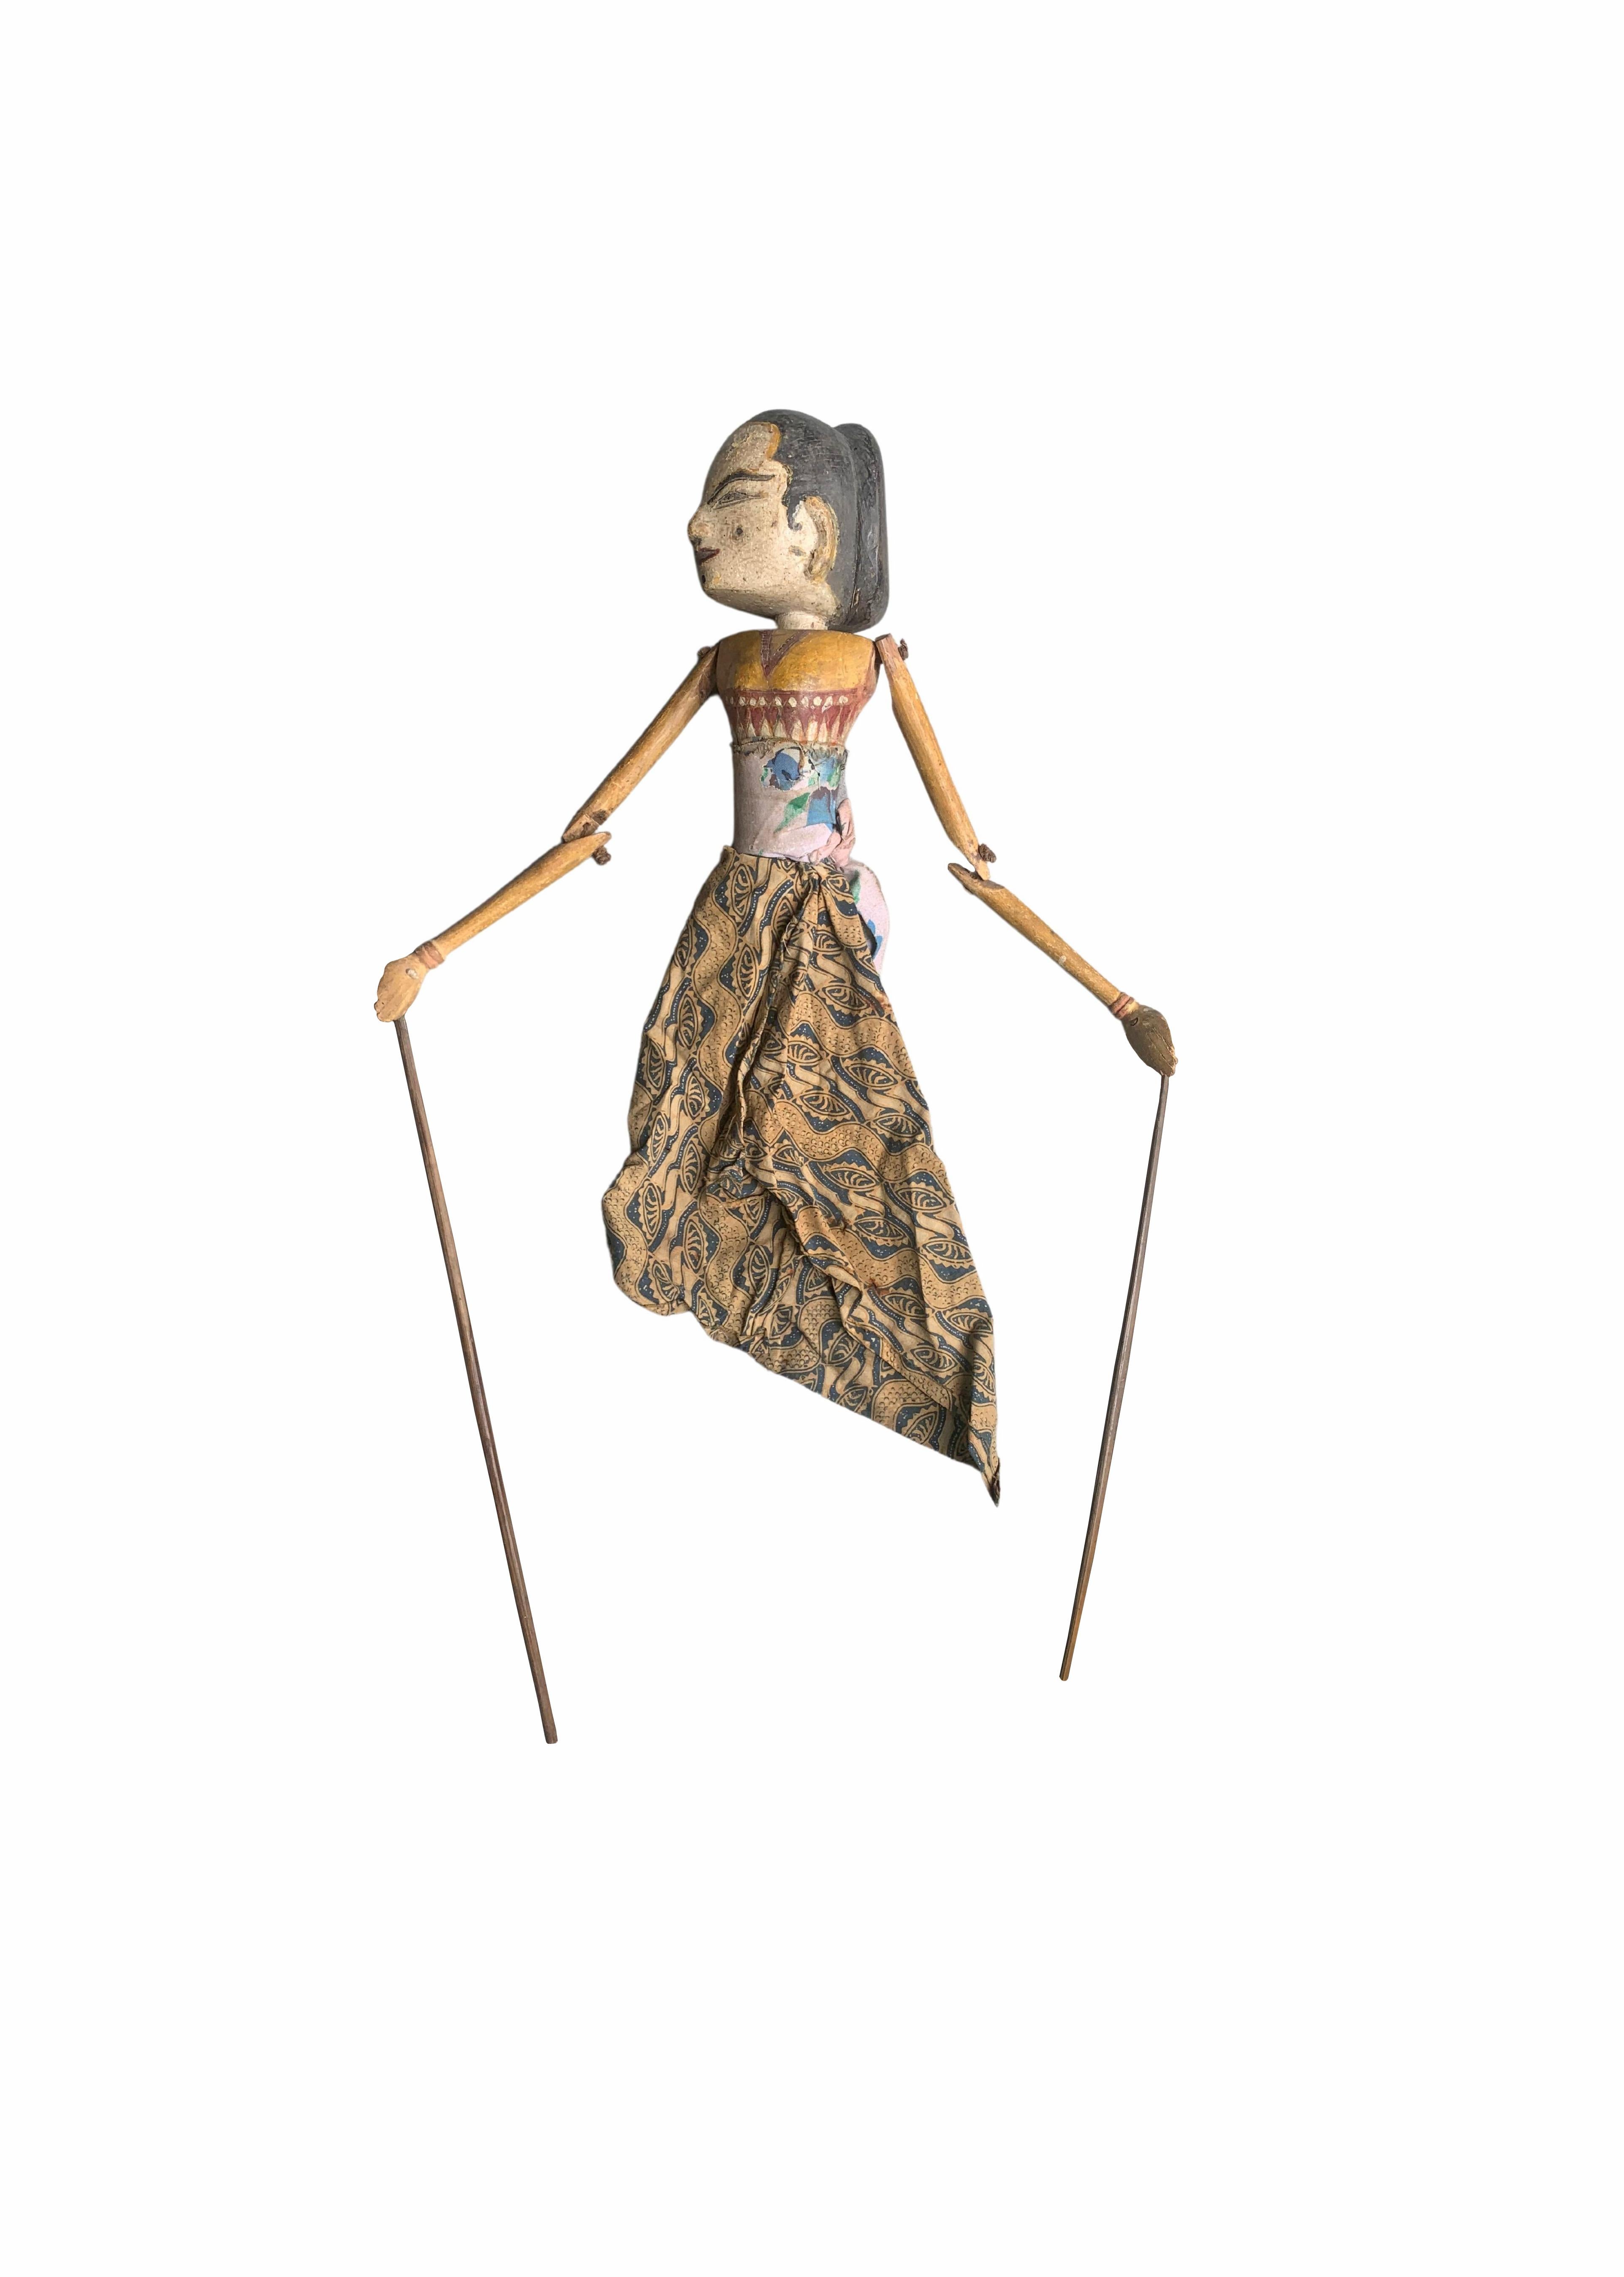 This “Wayang Golek” is a visibly old shadow puppet carved using soft wood and cloth. It features an articulated head and arms connected to rods, the dresses are made with batik fabric. Puppets such as these are used in shadow theatre to tell